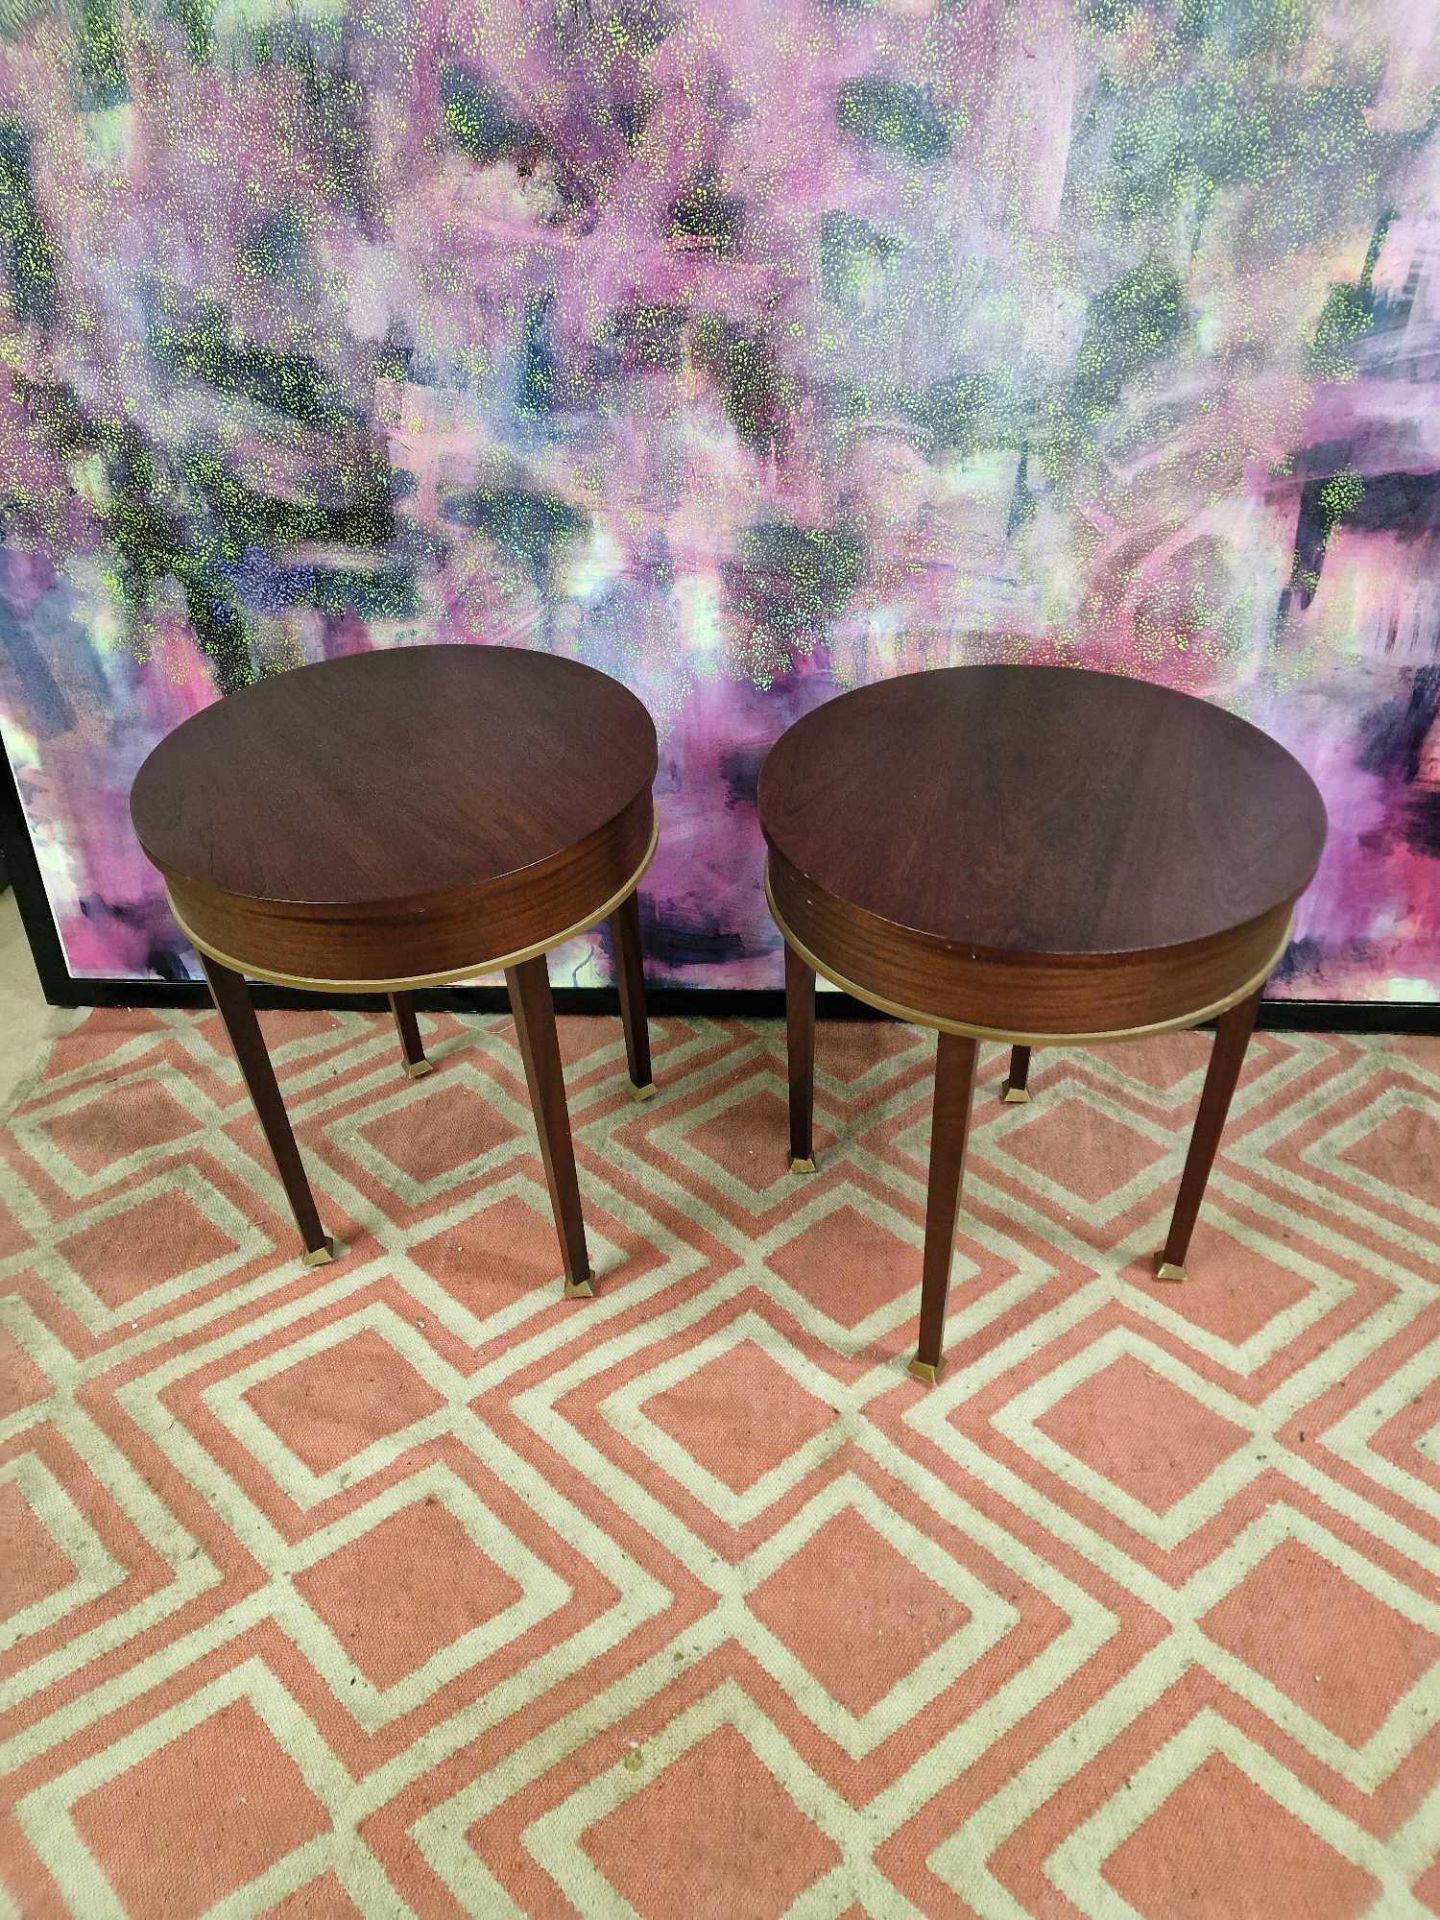 A Pair Of Mahogany Drum Side Tables With Circular Tops 55cm In Diameter With Brass Trim Details On - Image 2 of 3